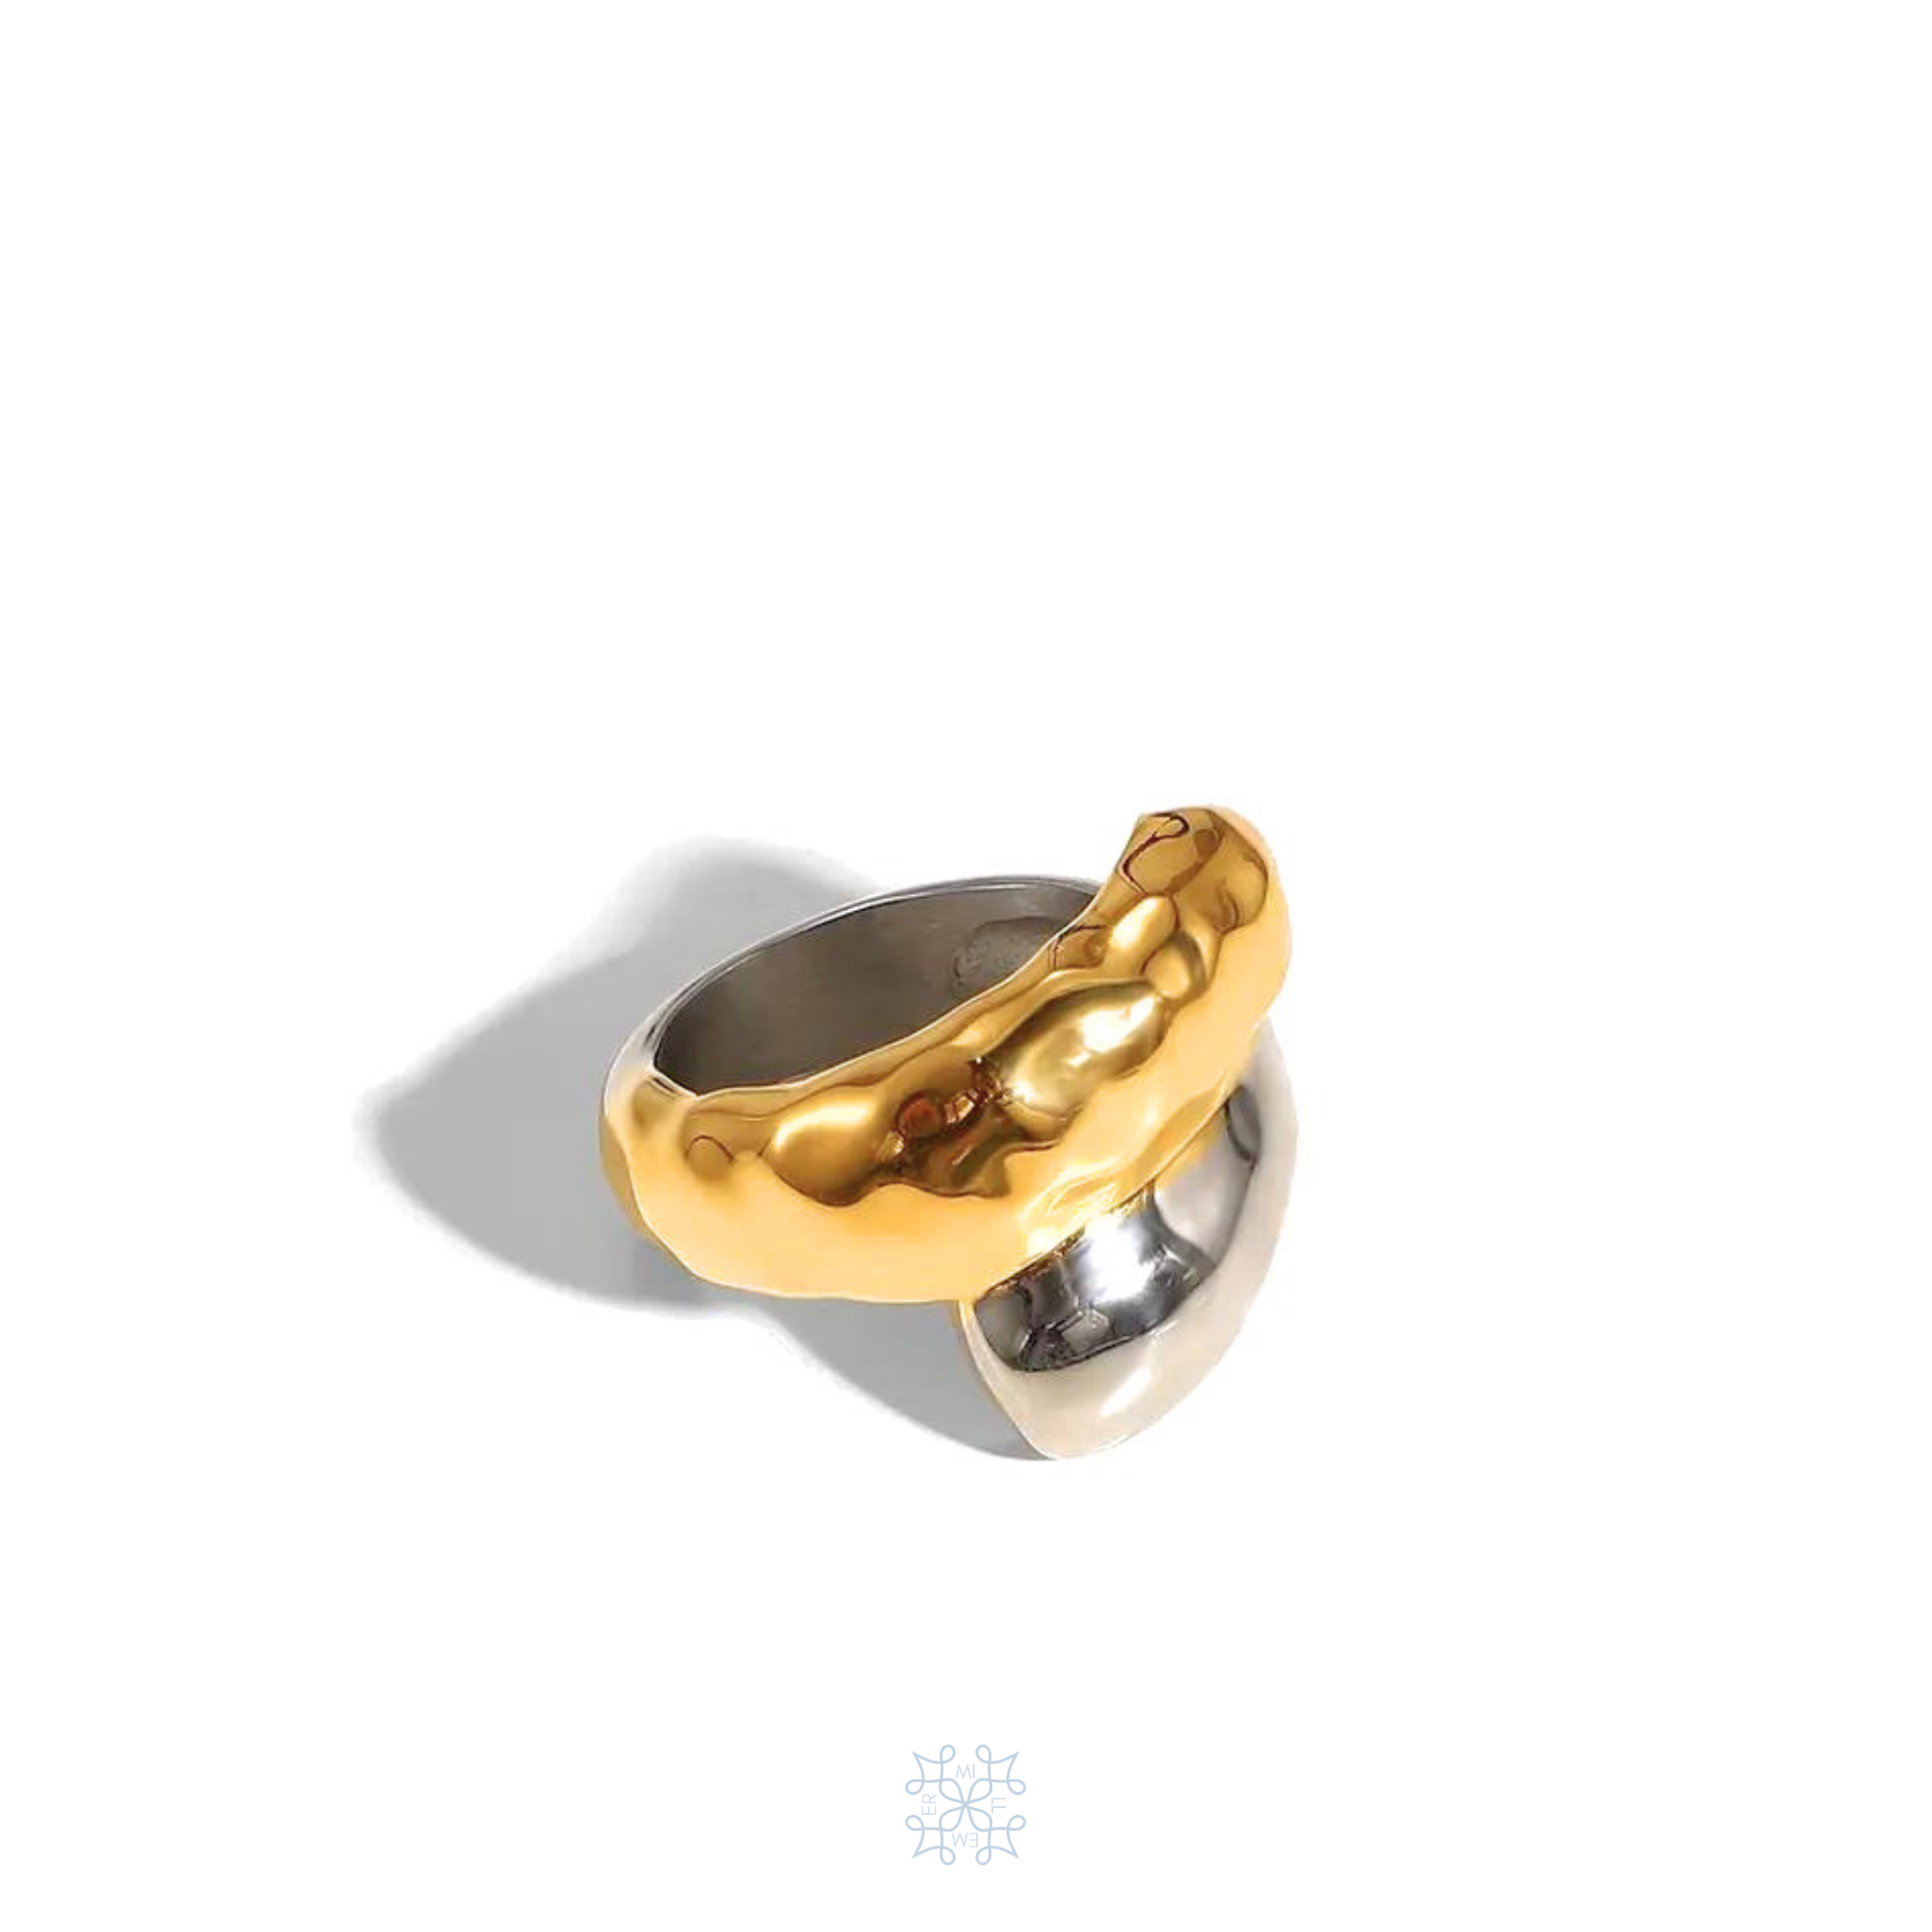 Indian Gold and silver chunky ring with irregular texture.